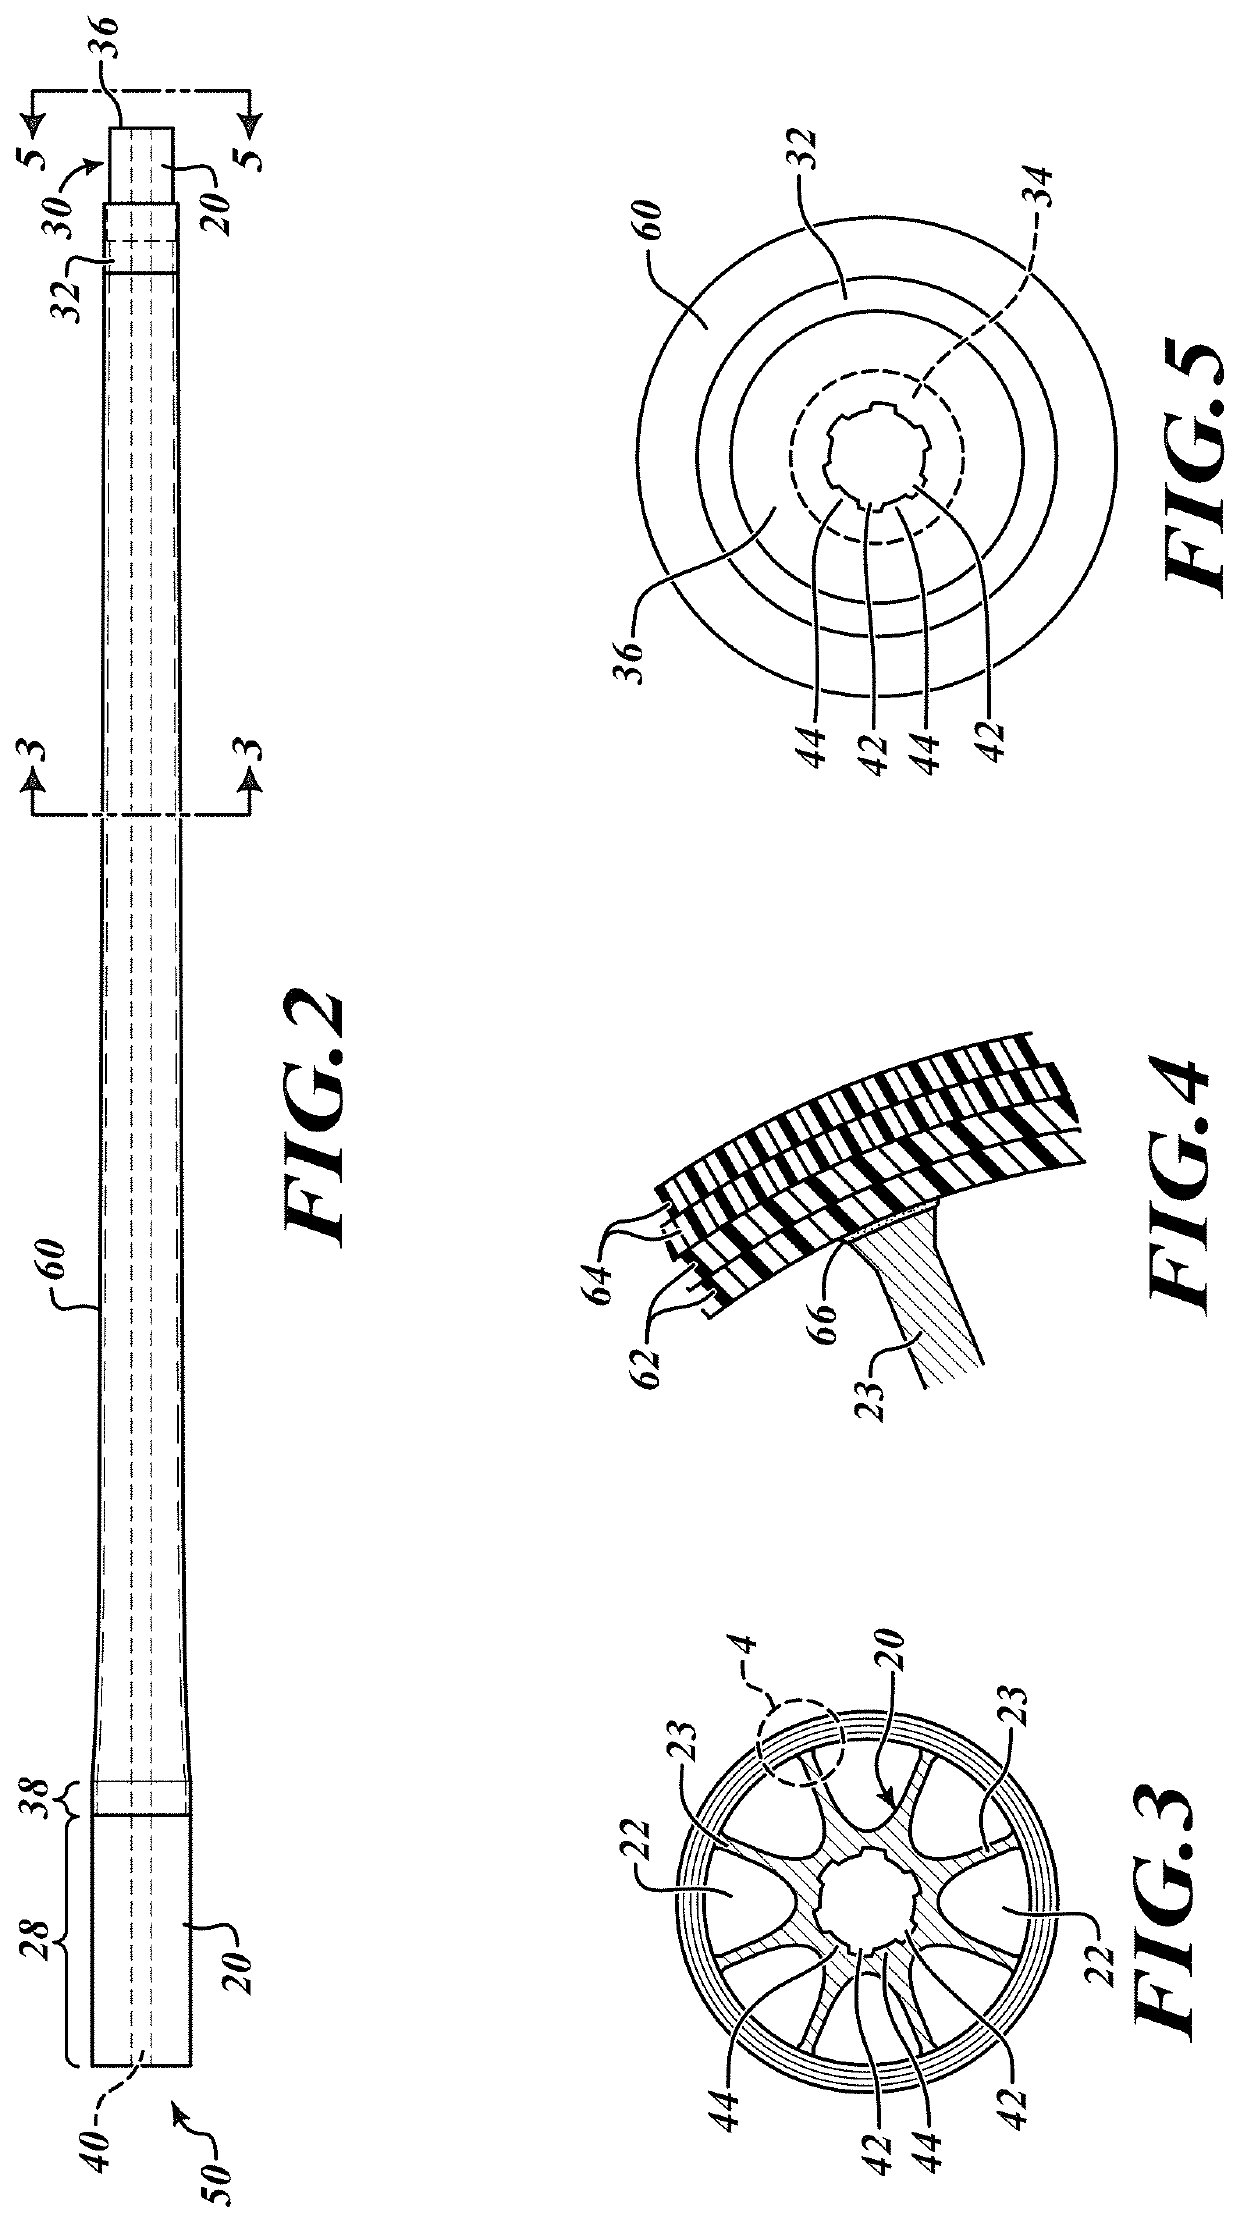 Carbon fiber barrel sleeve resiliently bonded to steel liner and method of construction